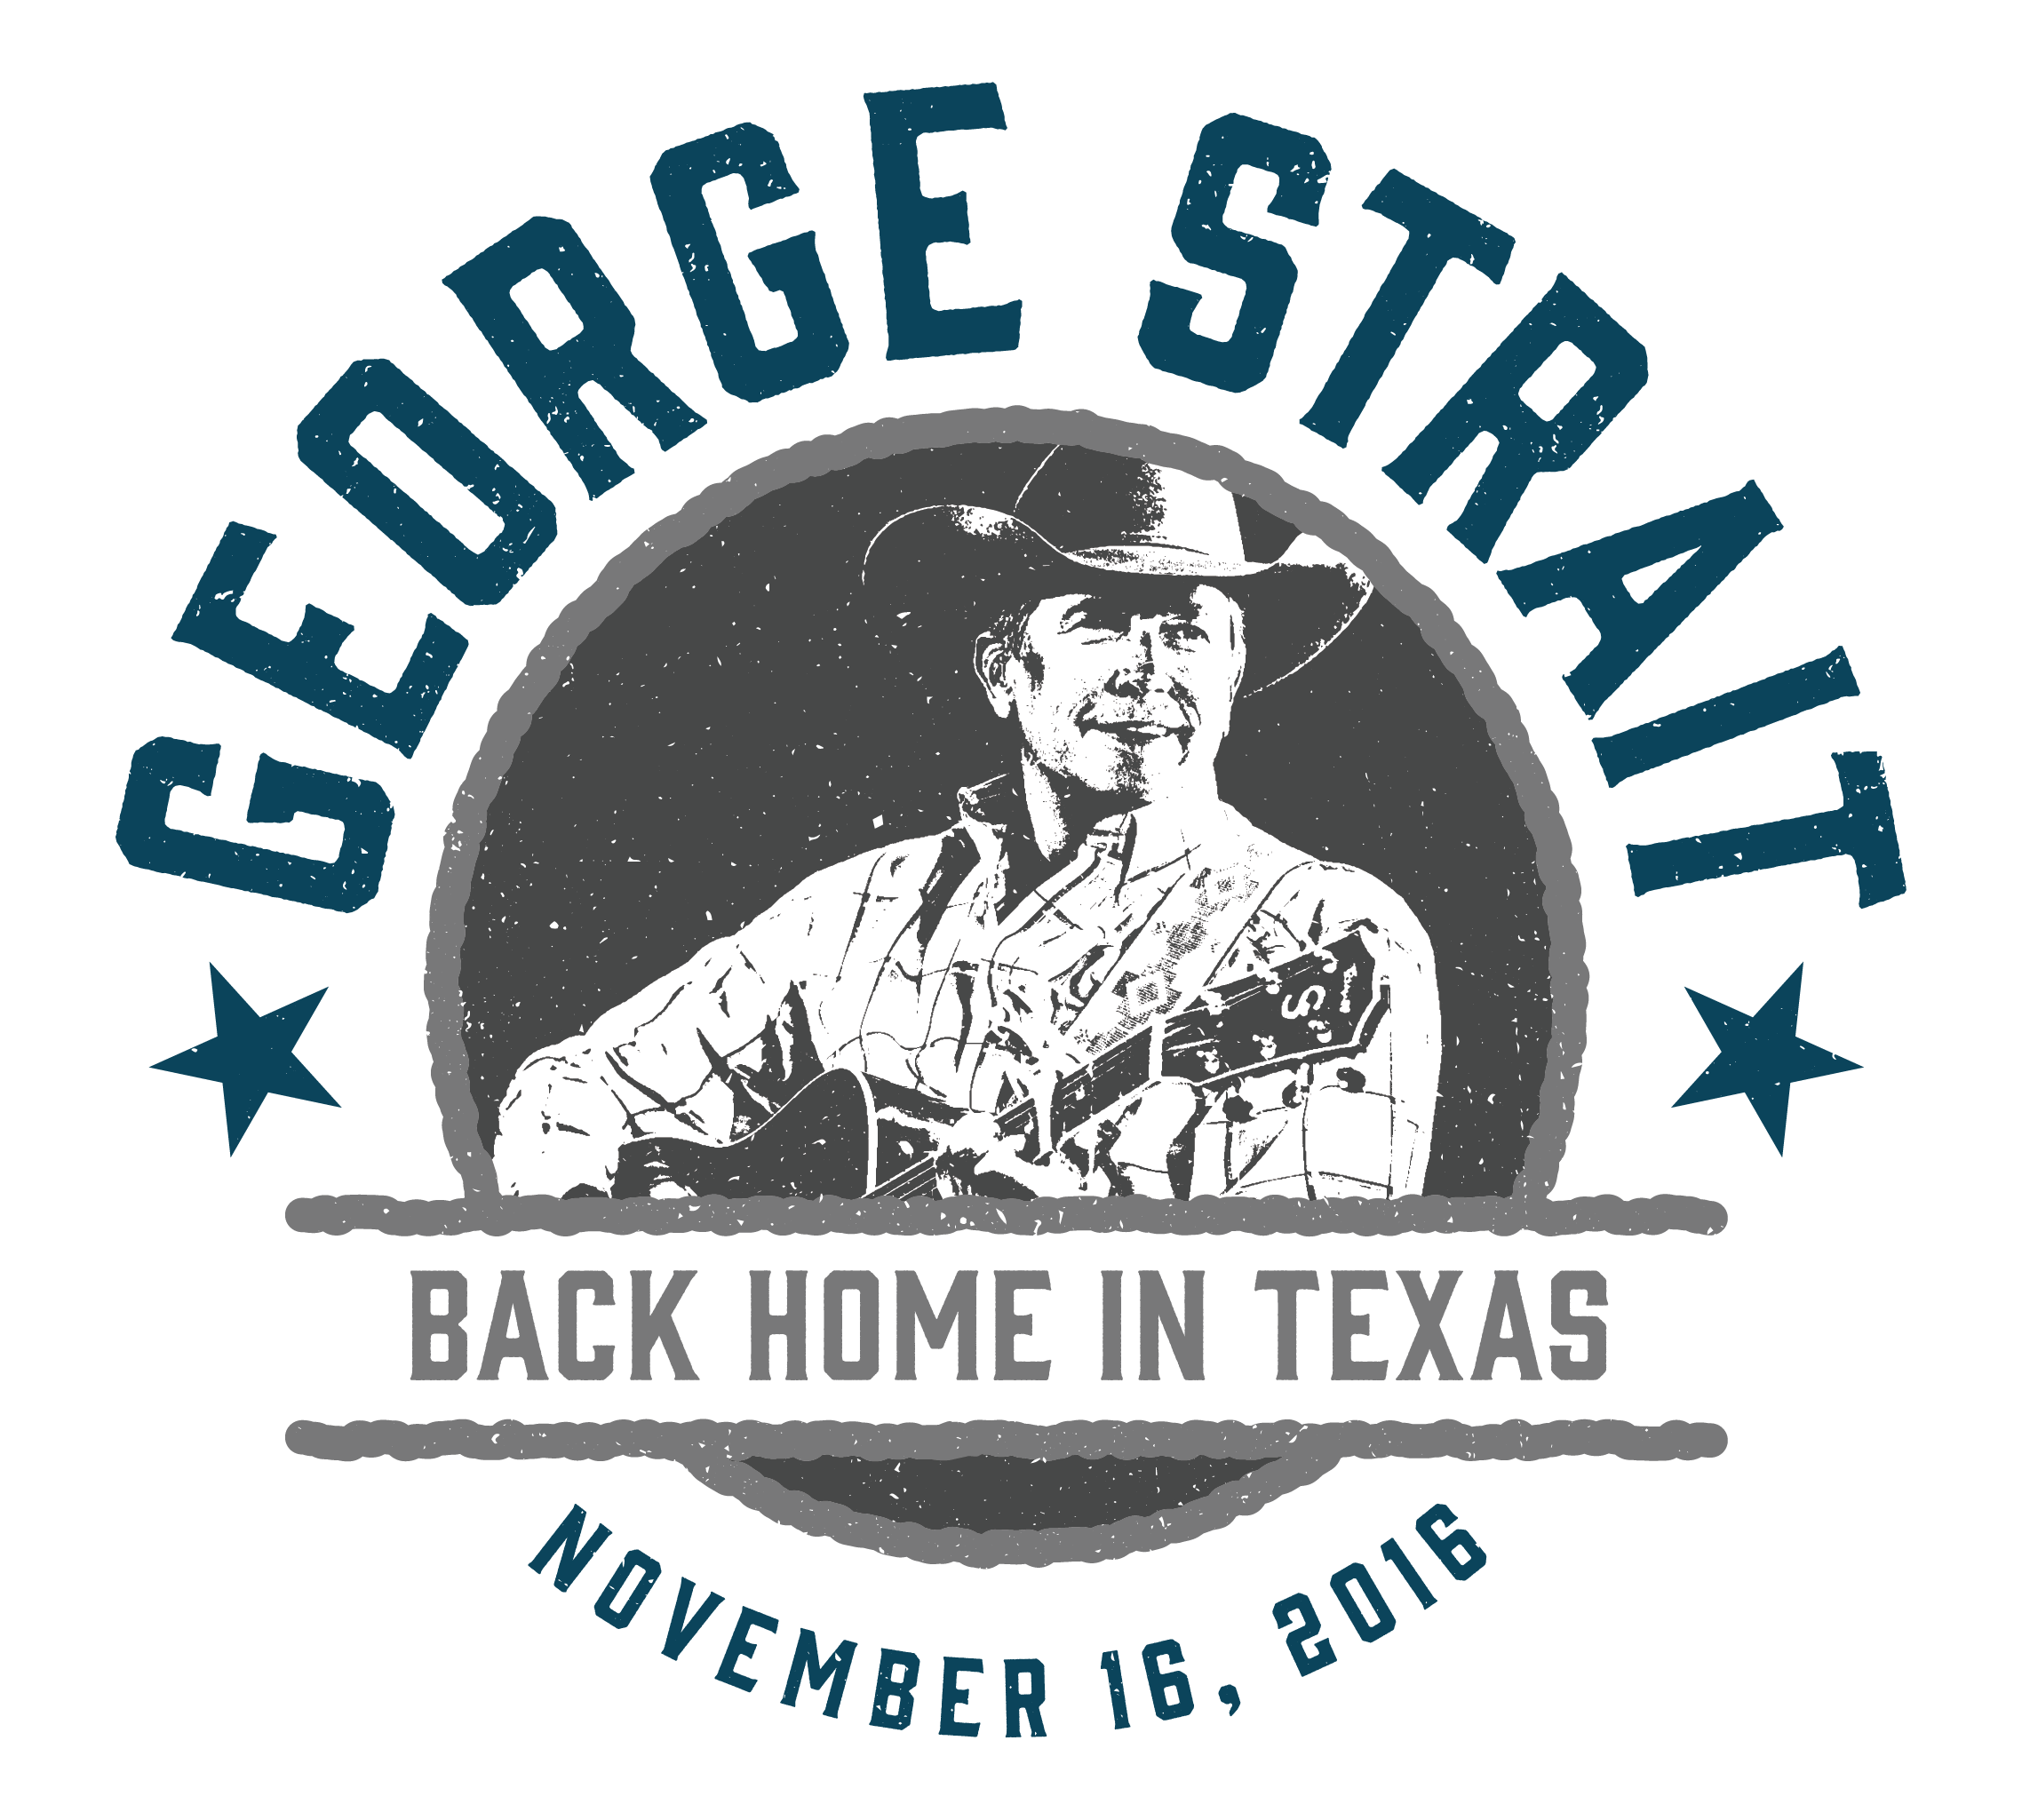 GEORGE STRAIT BACK HOME IN TEXAS FOR A VERY SPECIAL PERFORMANCE WEDNESDAY, NOV. 16